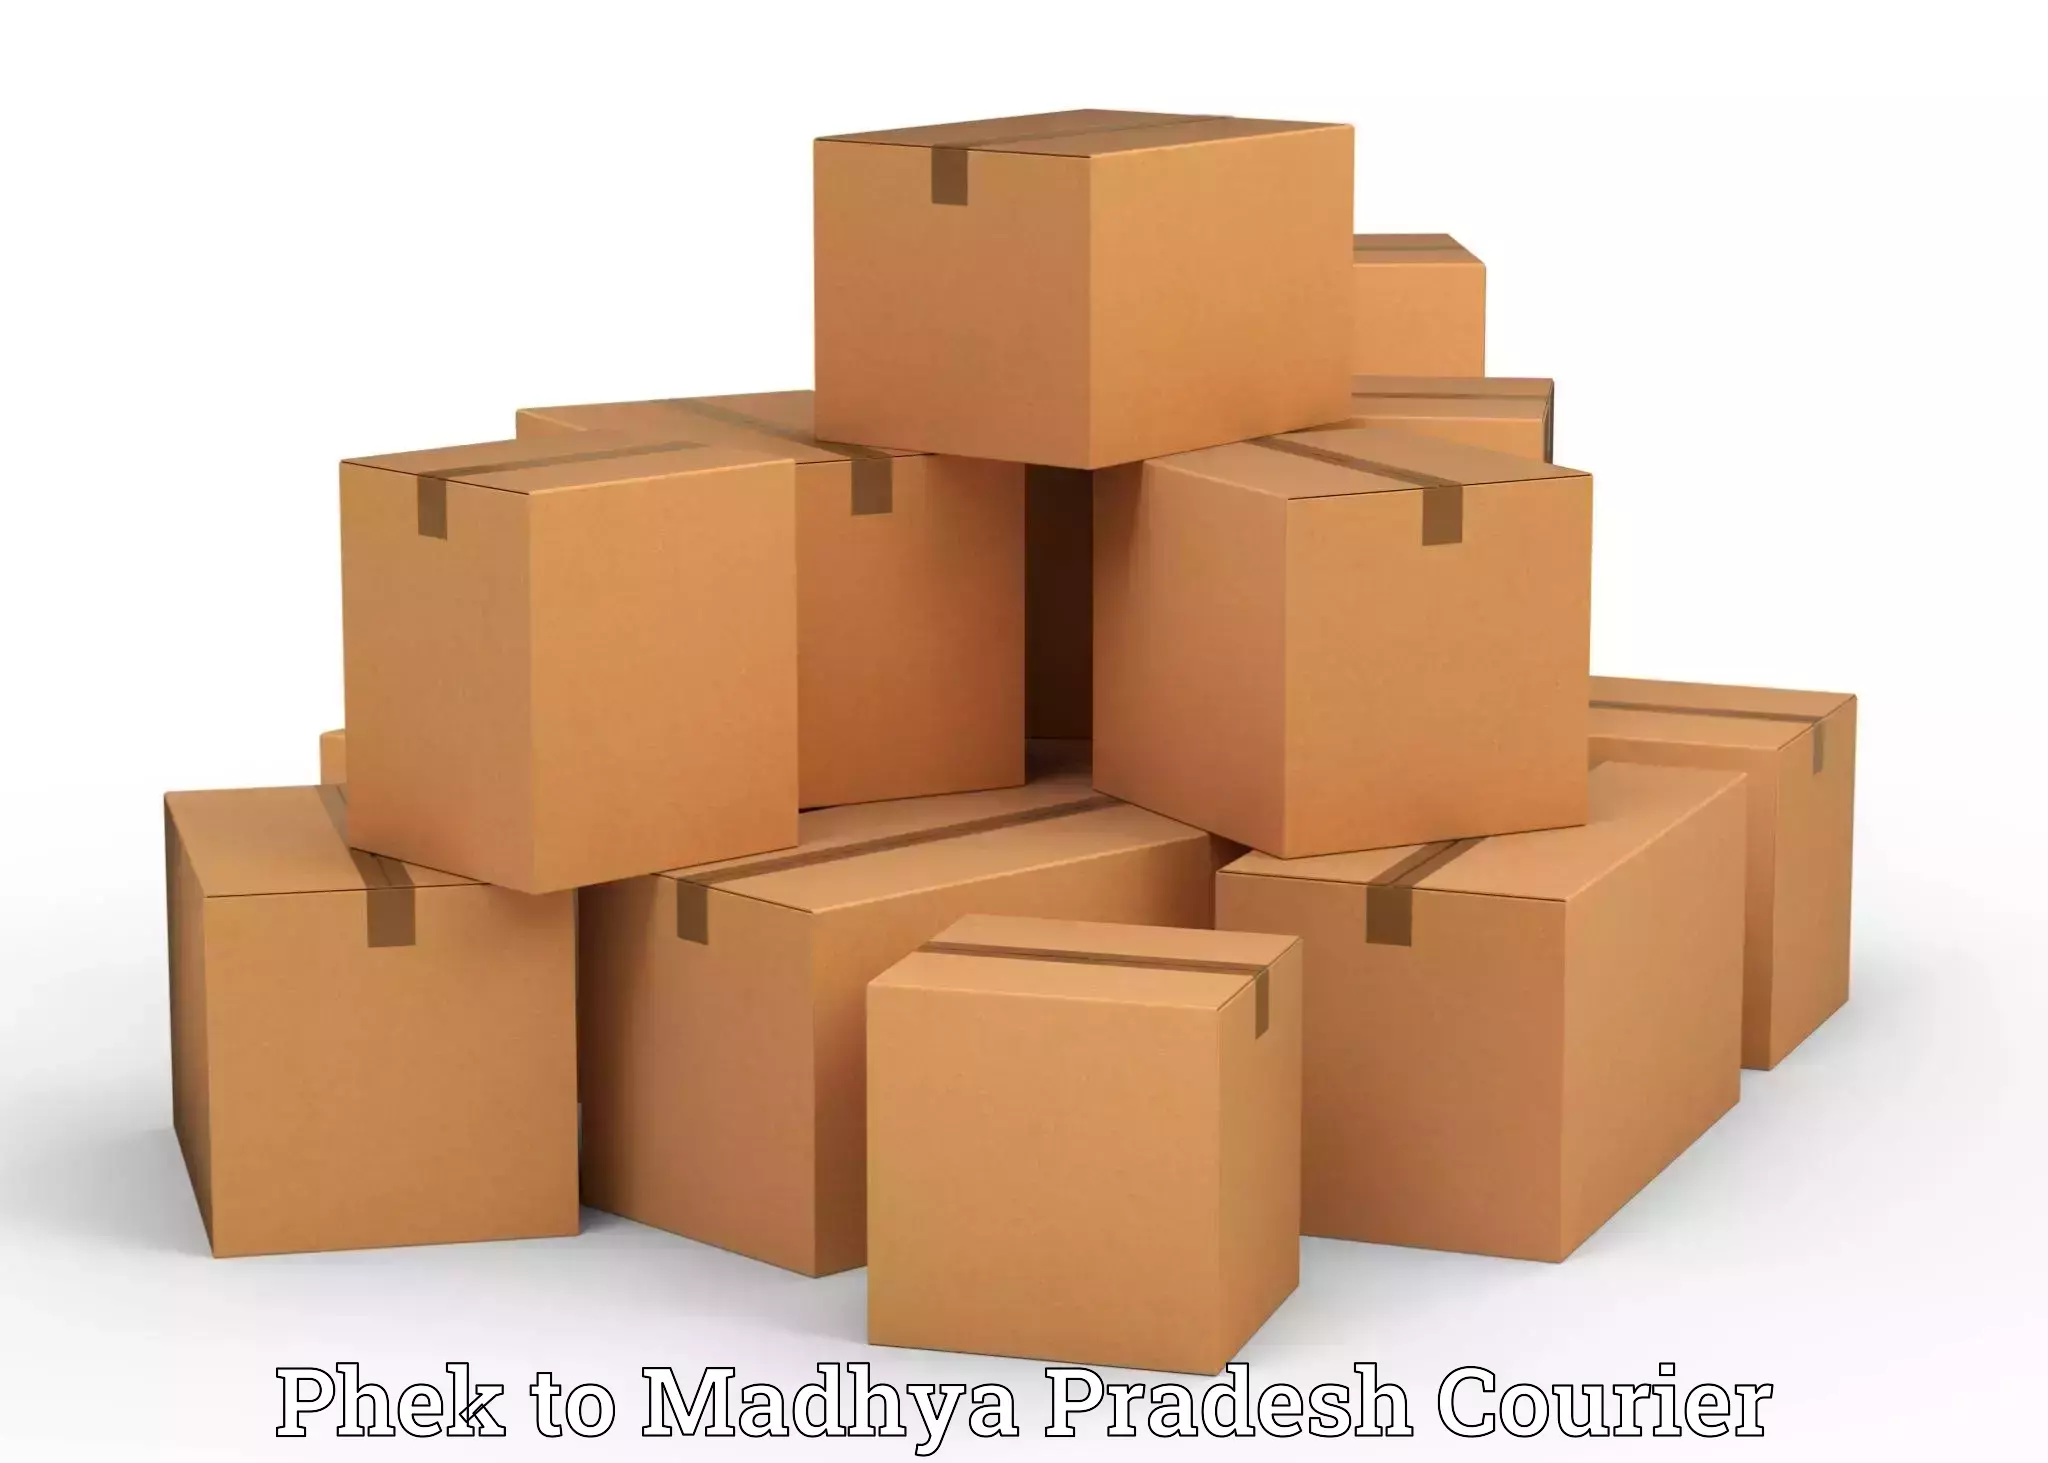 Furniture delivery service Phek to Gotegaon